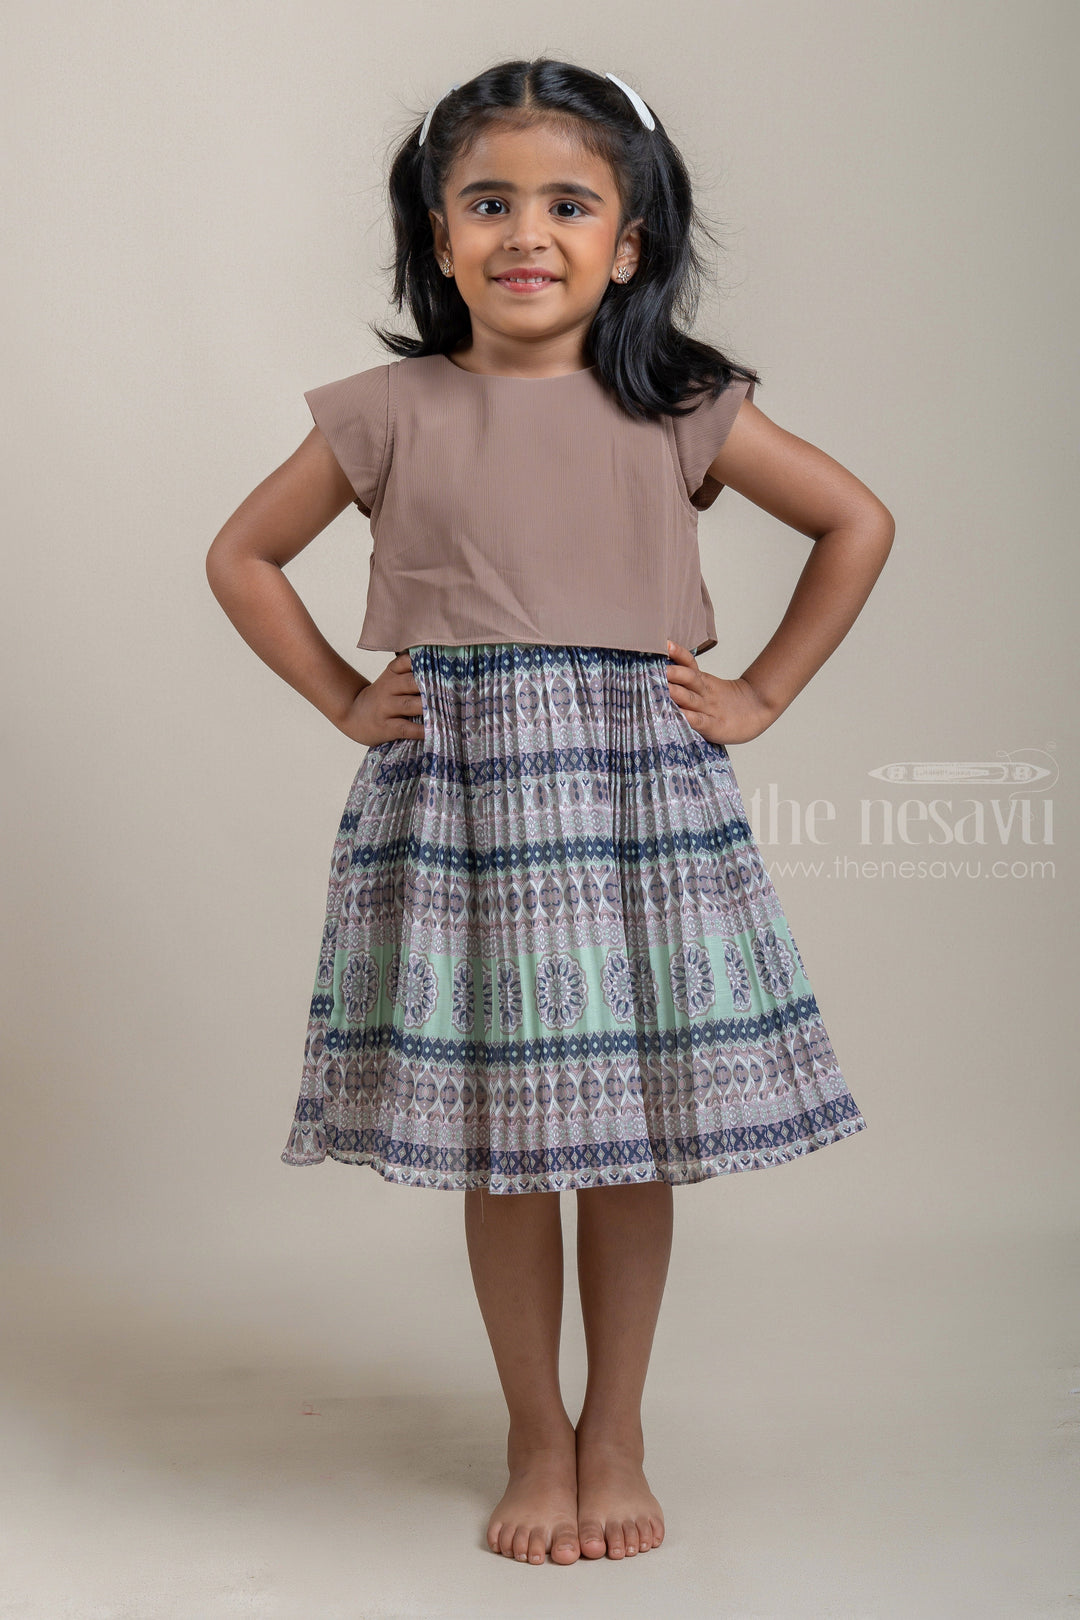 The Nesavu Frocks & Dresses Green Tiny Pleated Gorgette Brown Frock with Geometrical Stripe Print and Attached Jacket For Girls psr silks Nesavu 16 (1Y) / Brown / Georgette GFC1096A